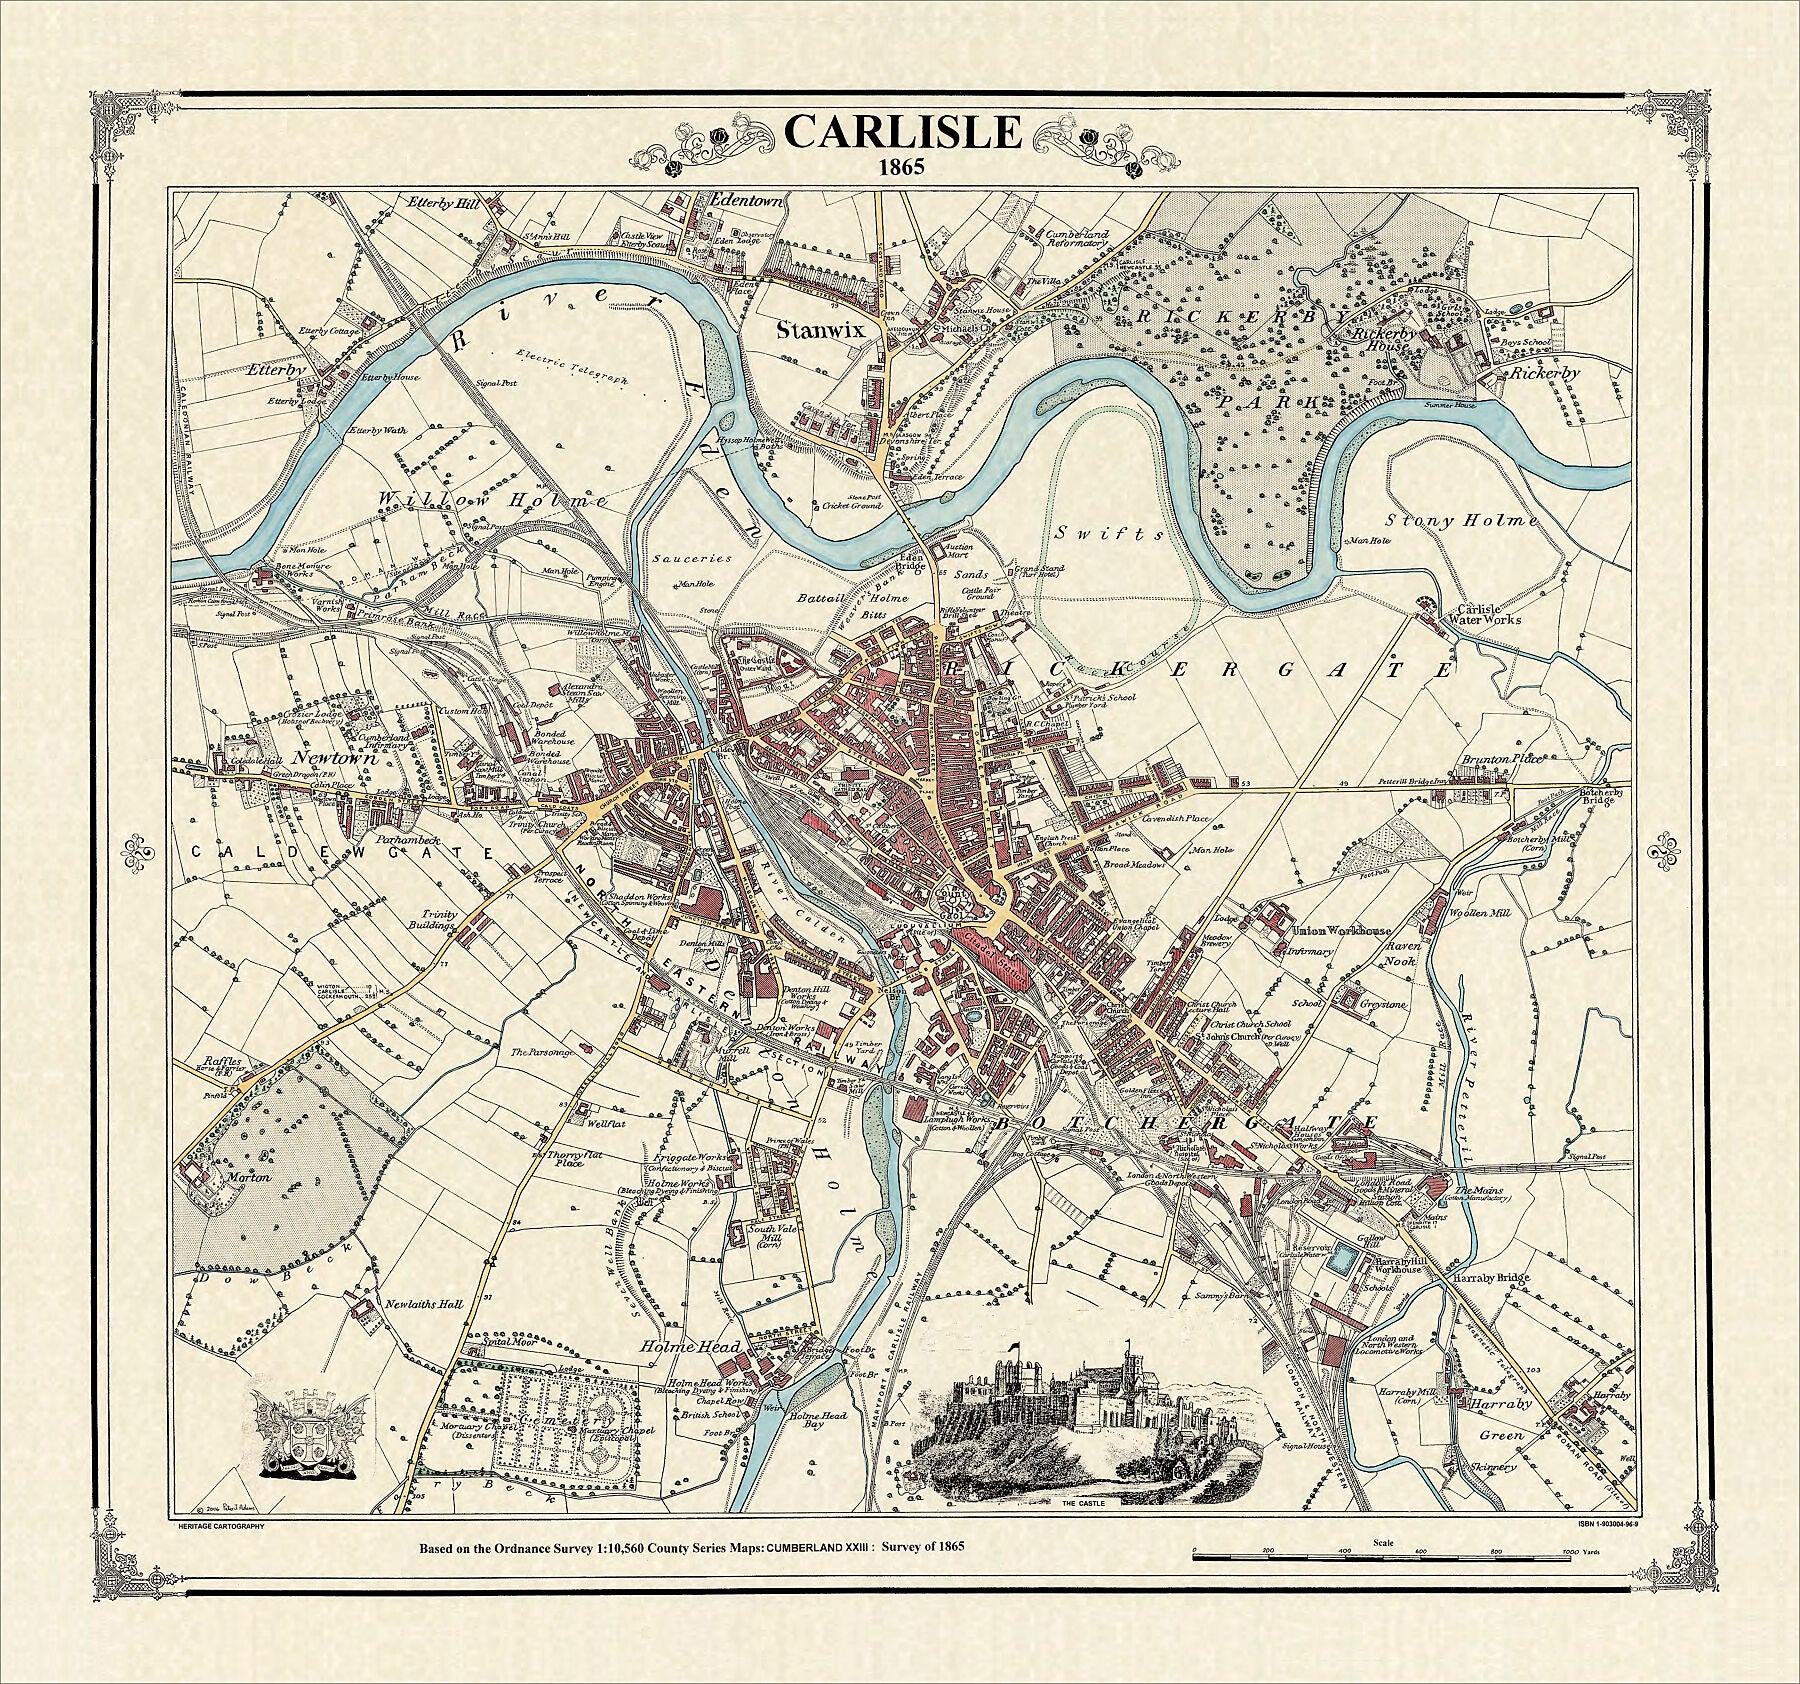 Coloured Victorian map of Carlisle in 1865 by Peter J Adams of Heritage Cartography